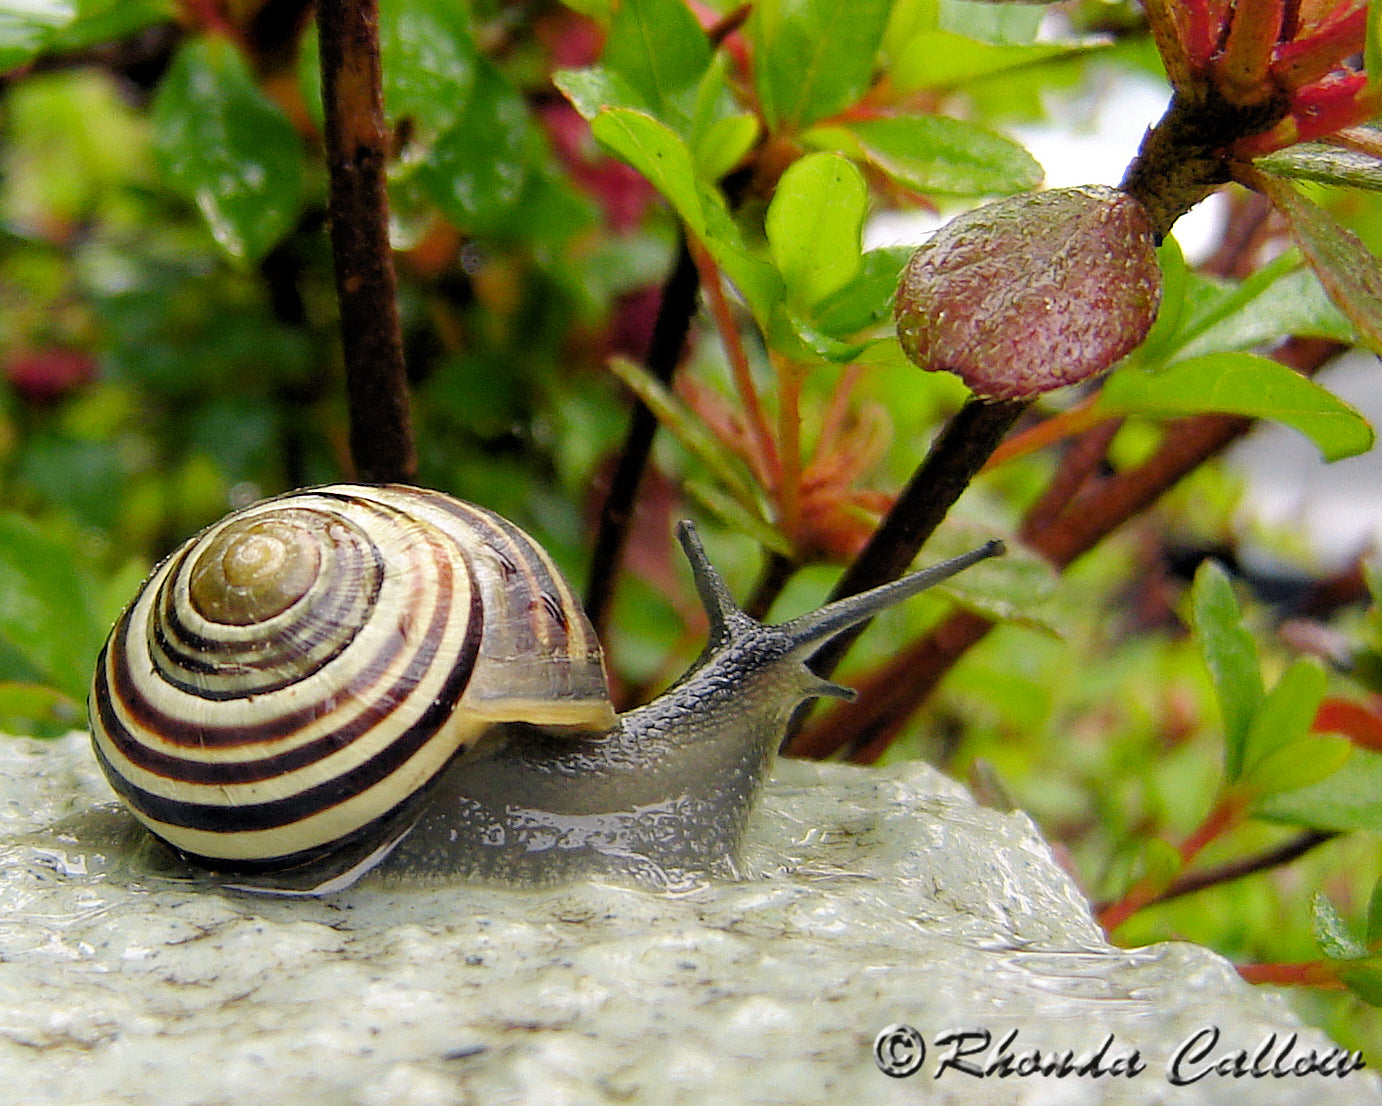 Close-up of a snail on the steps in the spring rain